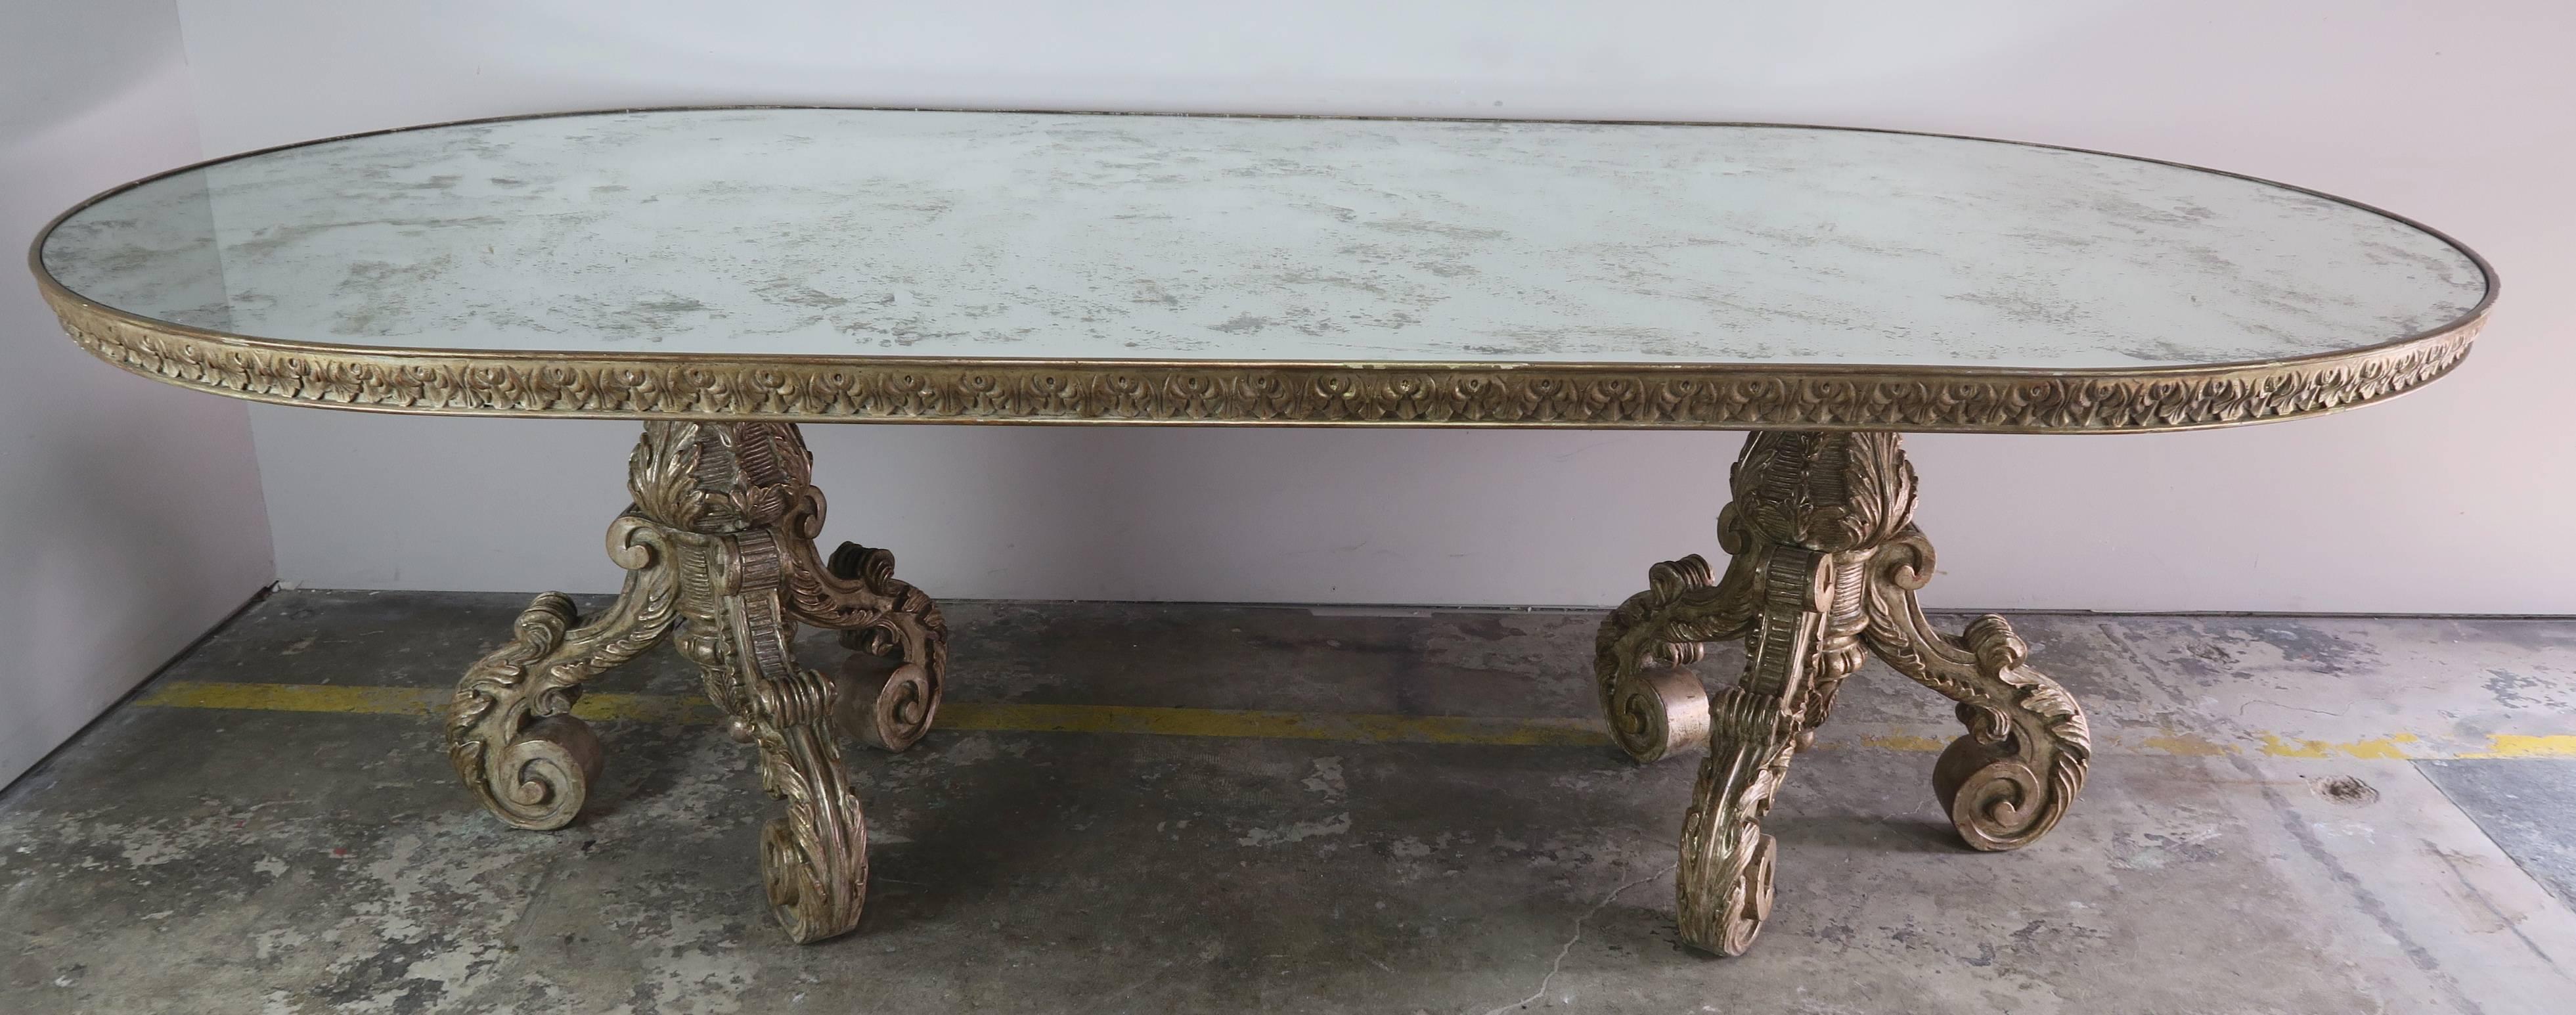 Italian carved Borghese silvered double tripod base dining table with antiqued mirrored race track shaped top.